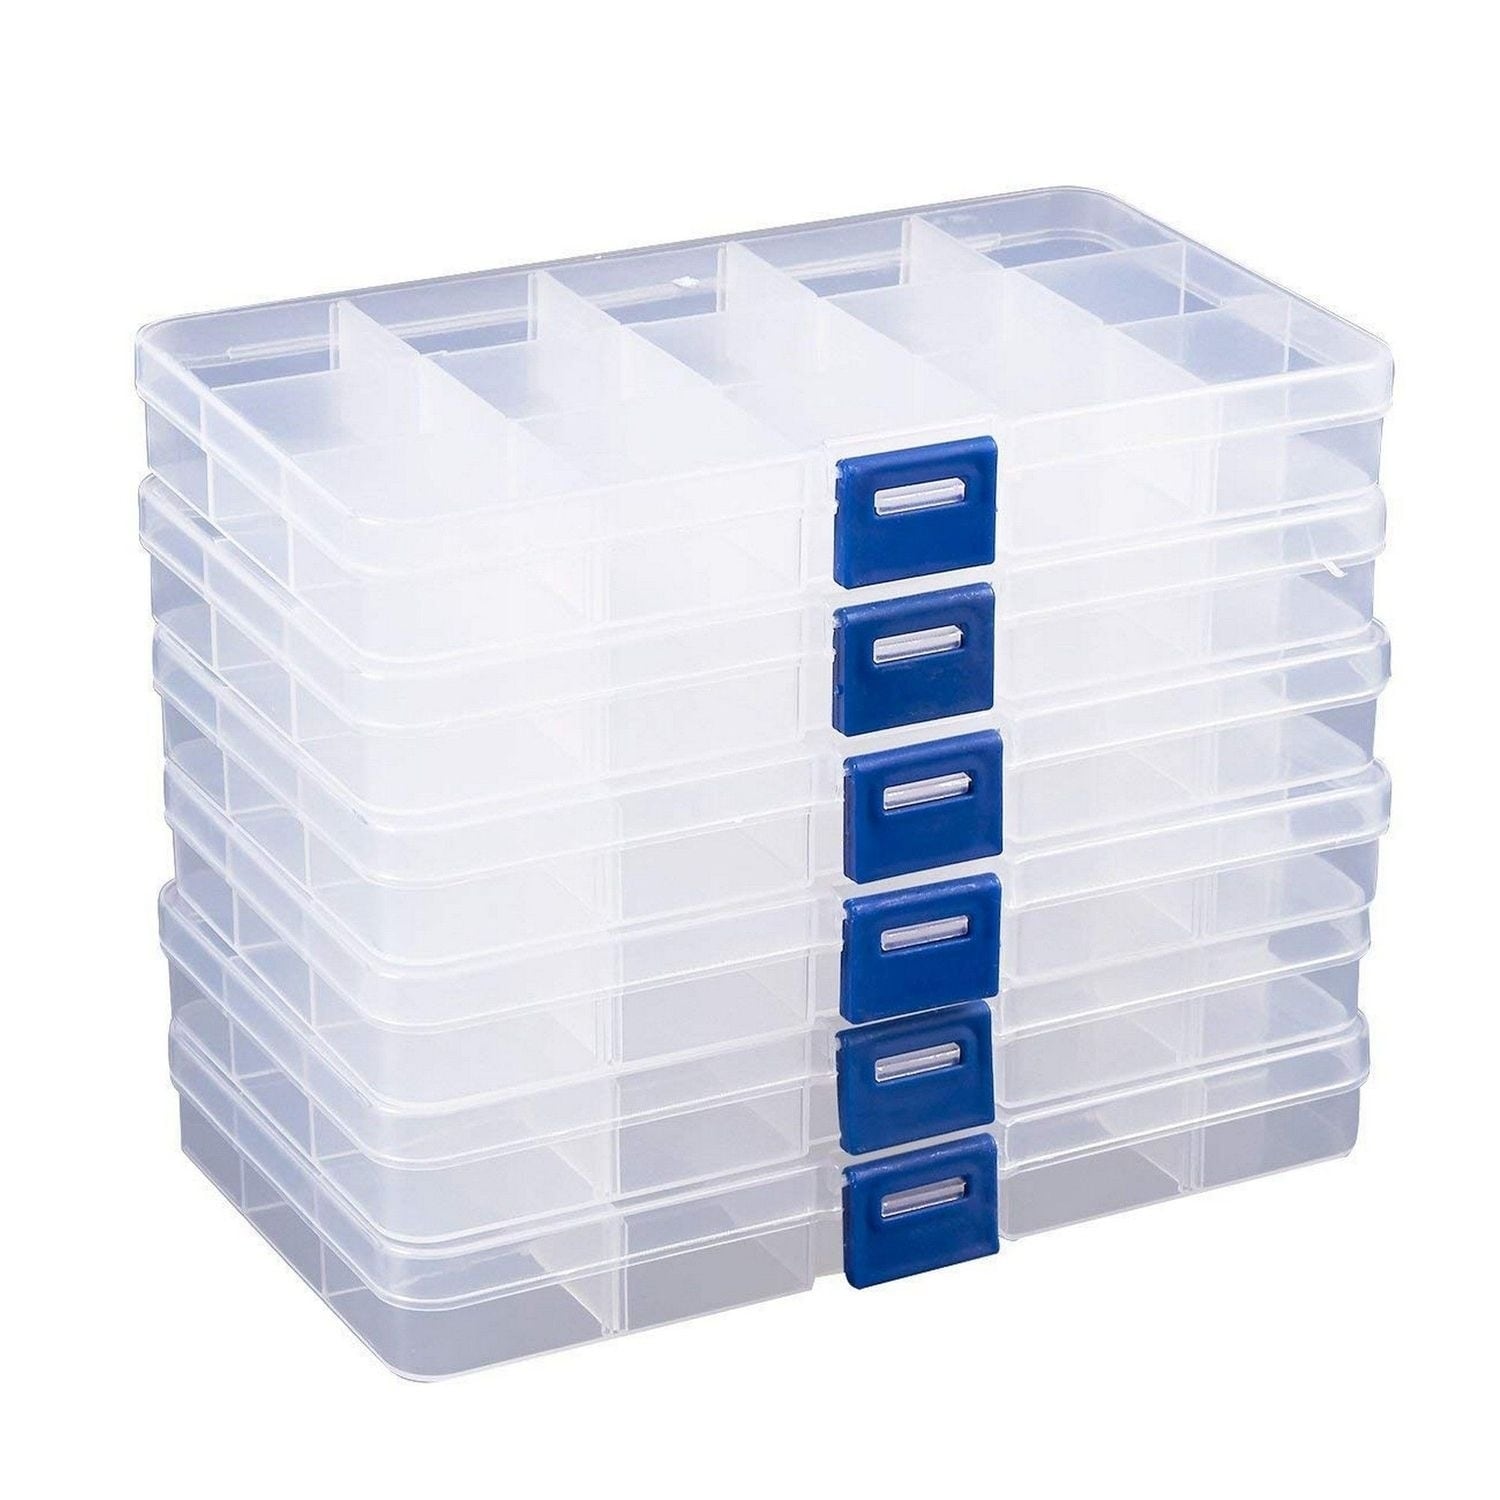 15 grids, 4 Colors DUOFIRE Plastic Organizer Container Storage Box Adjustable Divider Removable Grid Compartment for Jewelry Beads Earring Container Tool Fishing Hook Small Accessories 